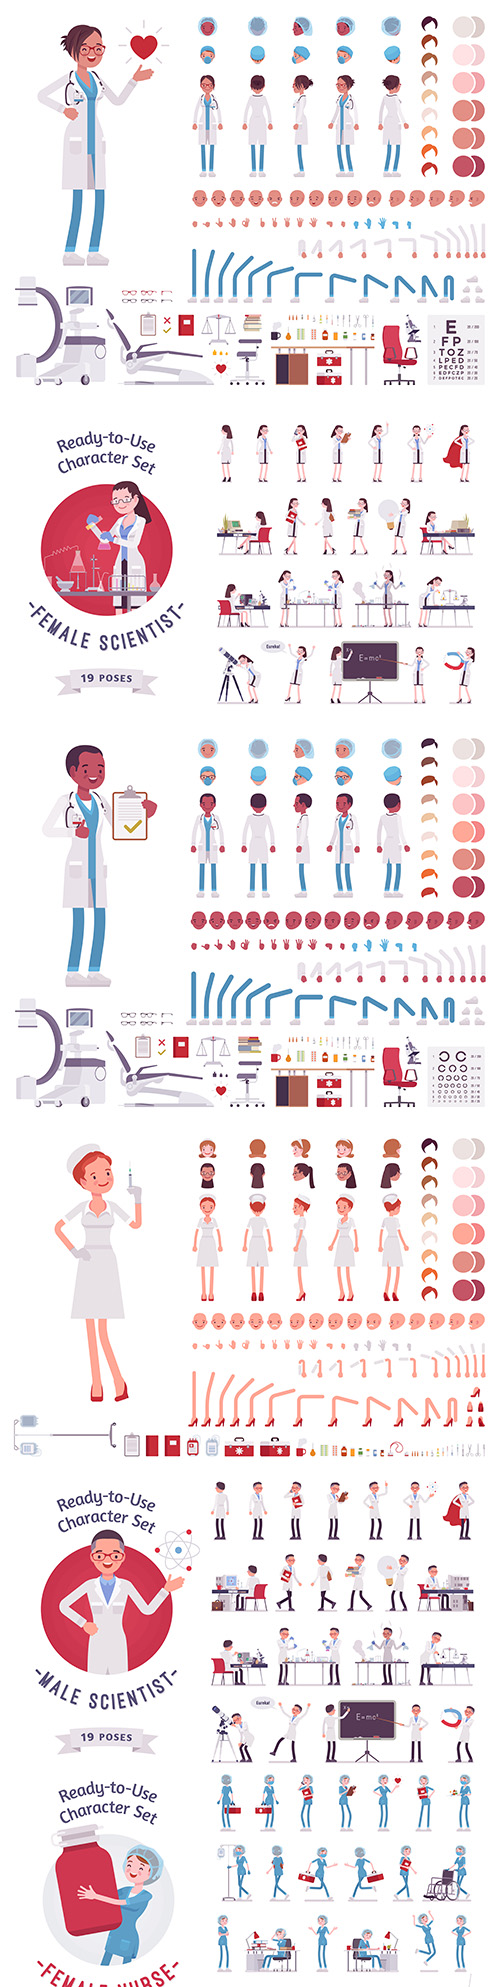 Doctor and nurse cartoon designer from different body parts and itemsxA;